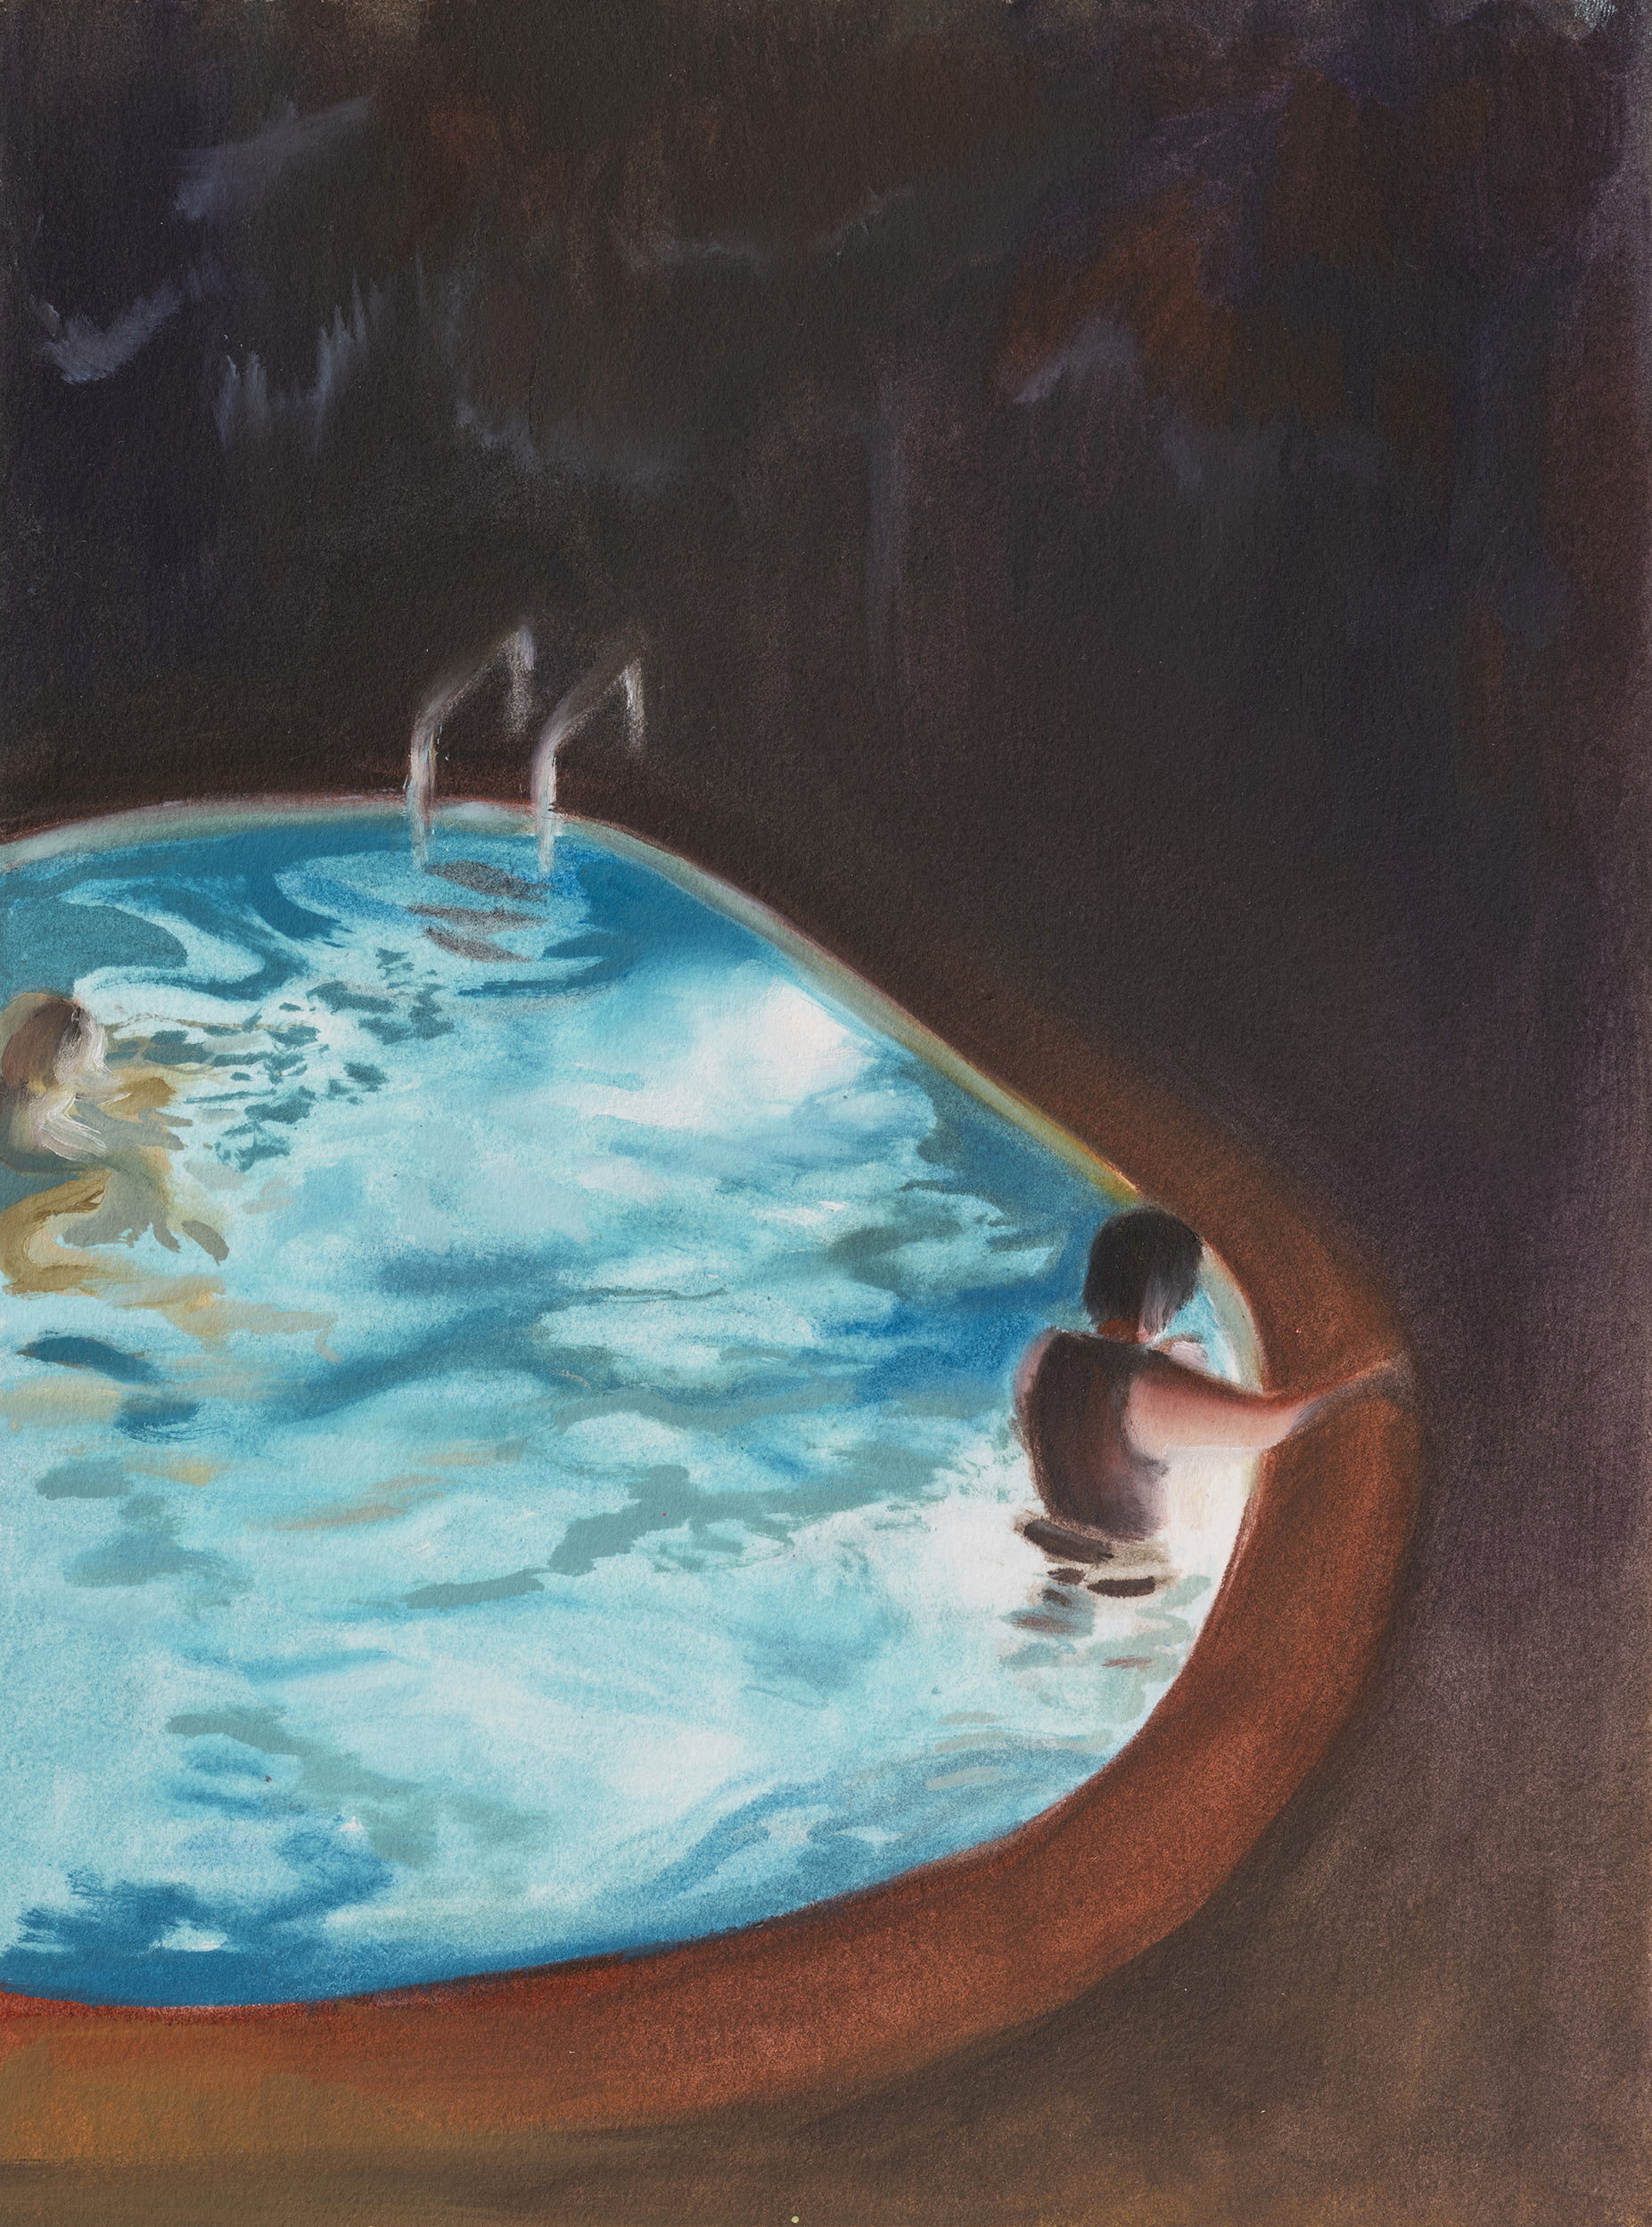 Night Pool - Dark painting with a bright blue swimming pool at night - by Sarah Hardy